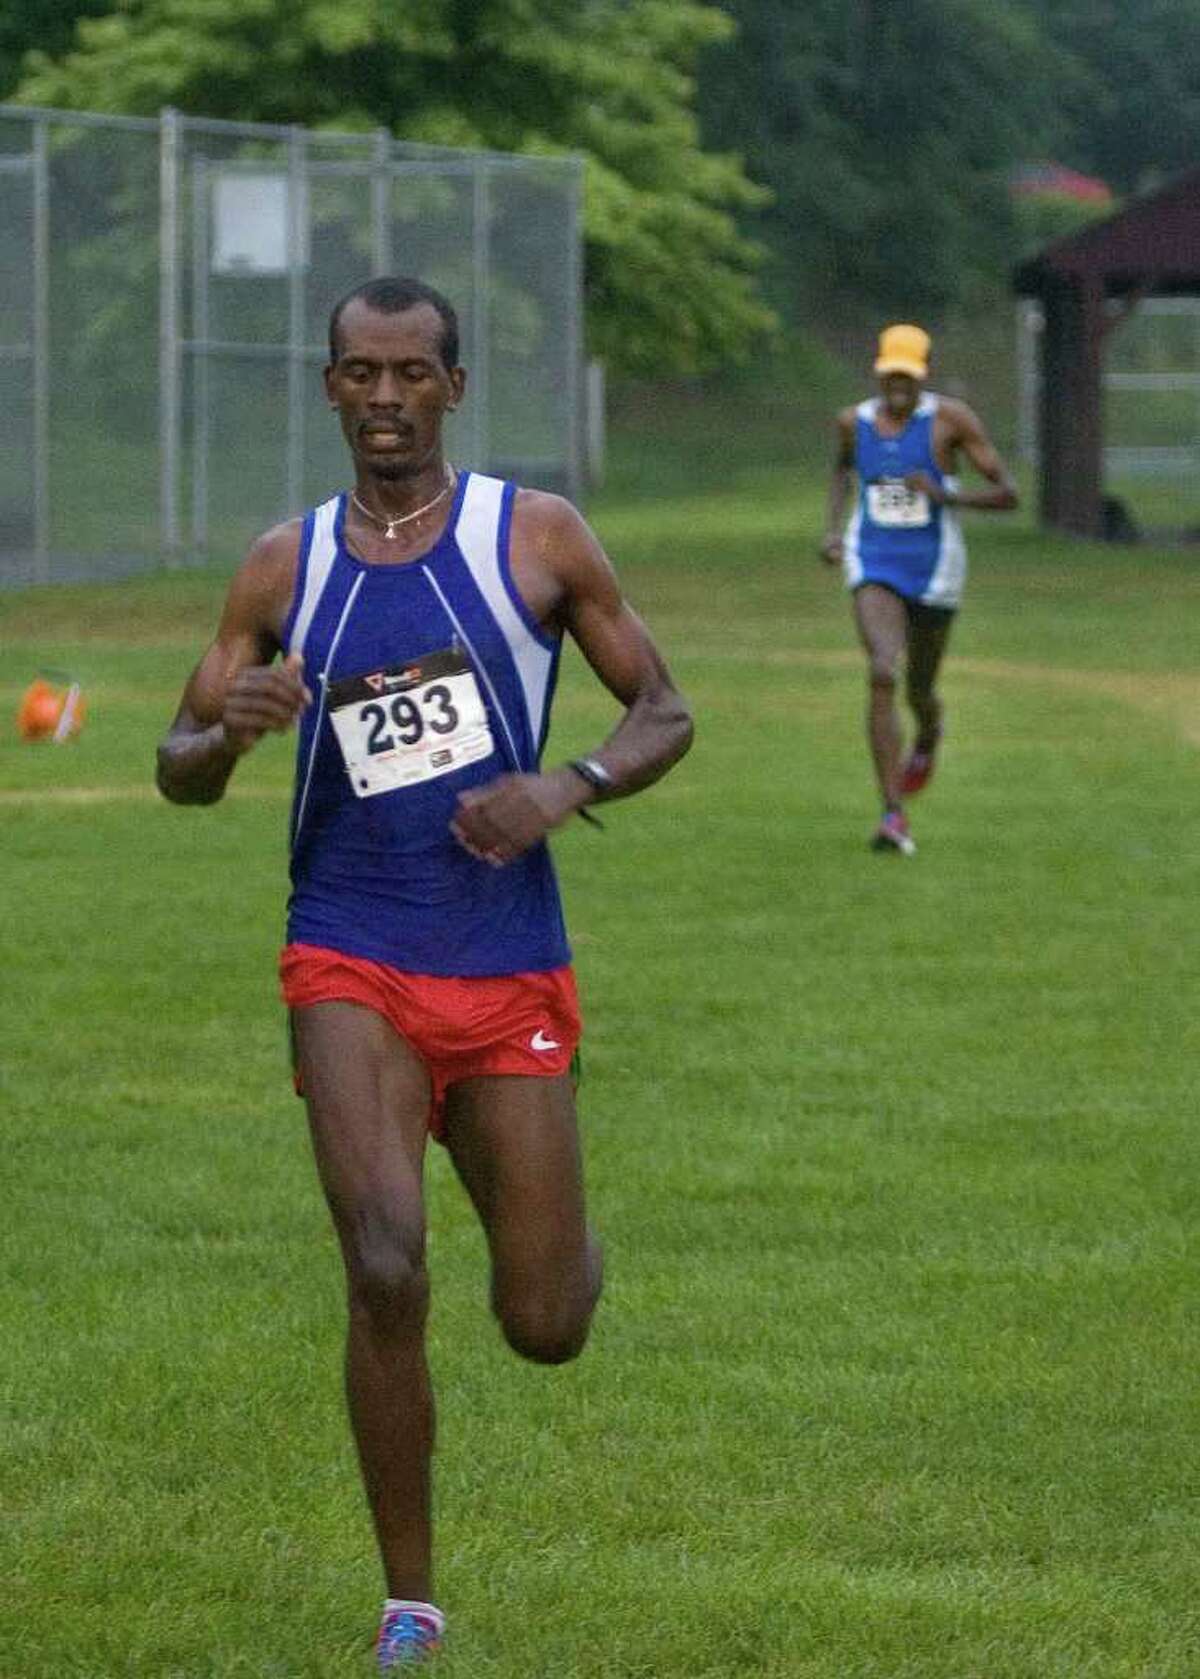 Kumsa Megersa, left, crosses the finish line in first place as fellow Bronx, N.Y., resident Abiyot Endale finishes in second place during the New Milford Moonlight Run 5K on Friday, July 8, 2011. Both men are originally from Ethiopia.